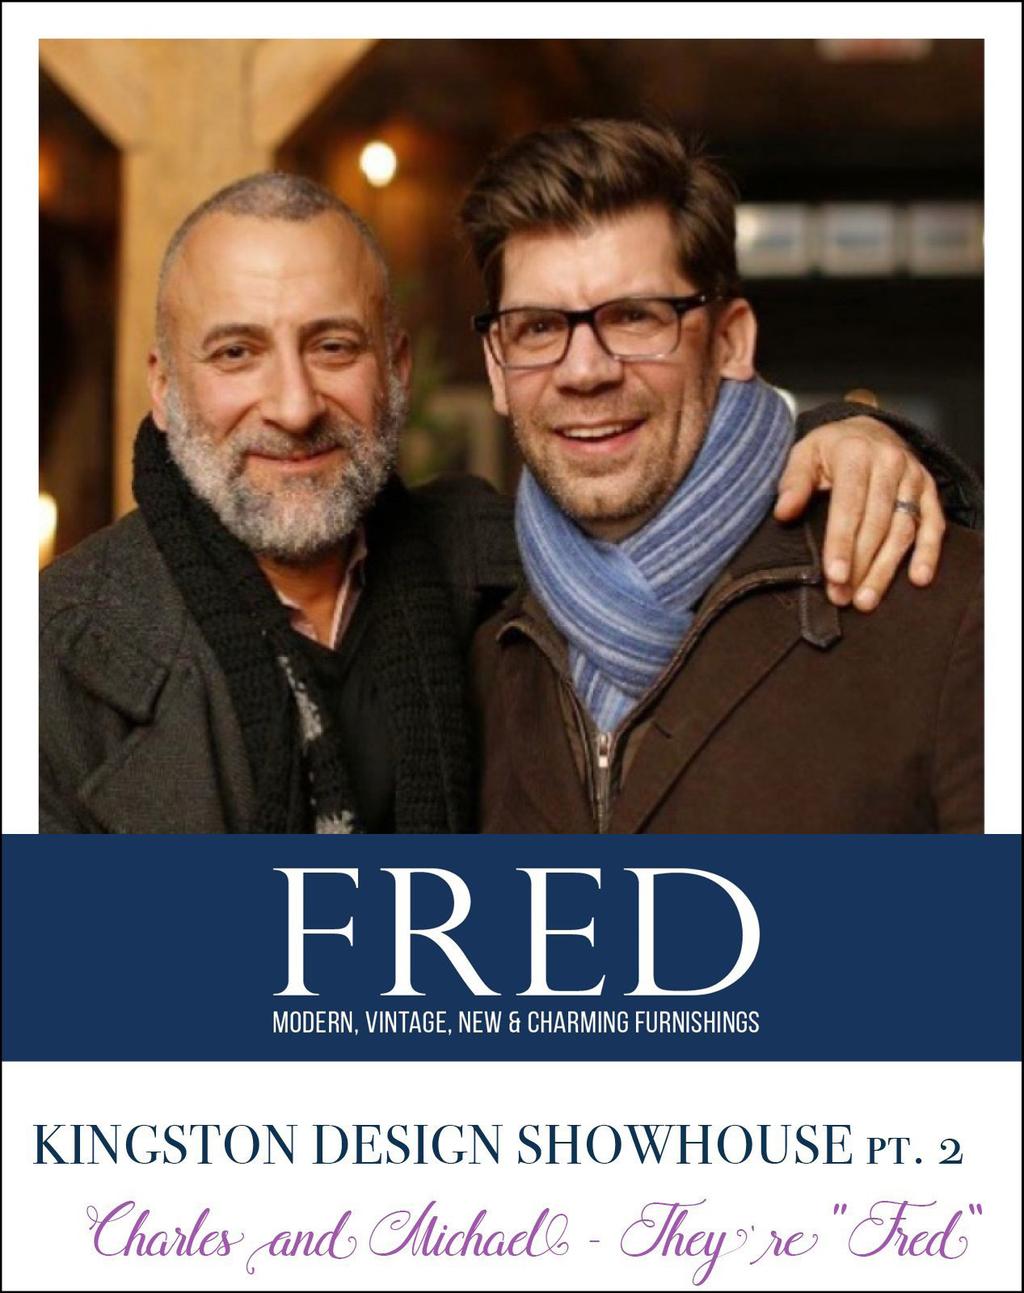 I was so glad to hear that owners Charles Farruggio and Michael Van Nort were going to be part of The Kingston Design Connections Kingston Design Showhouse.